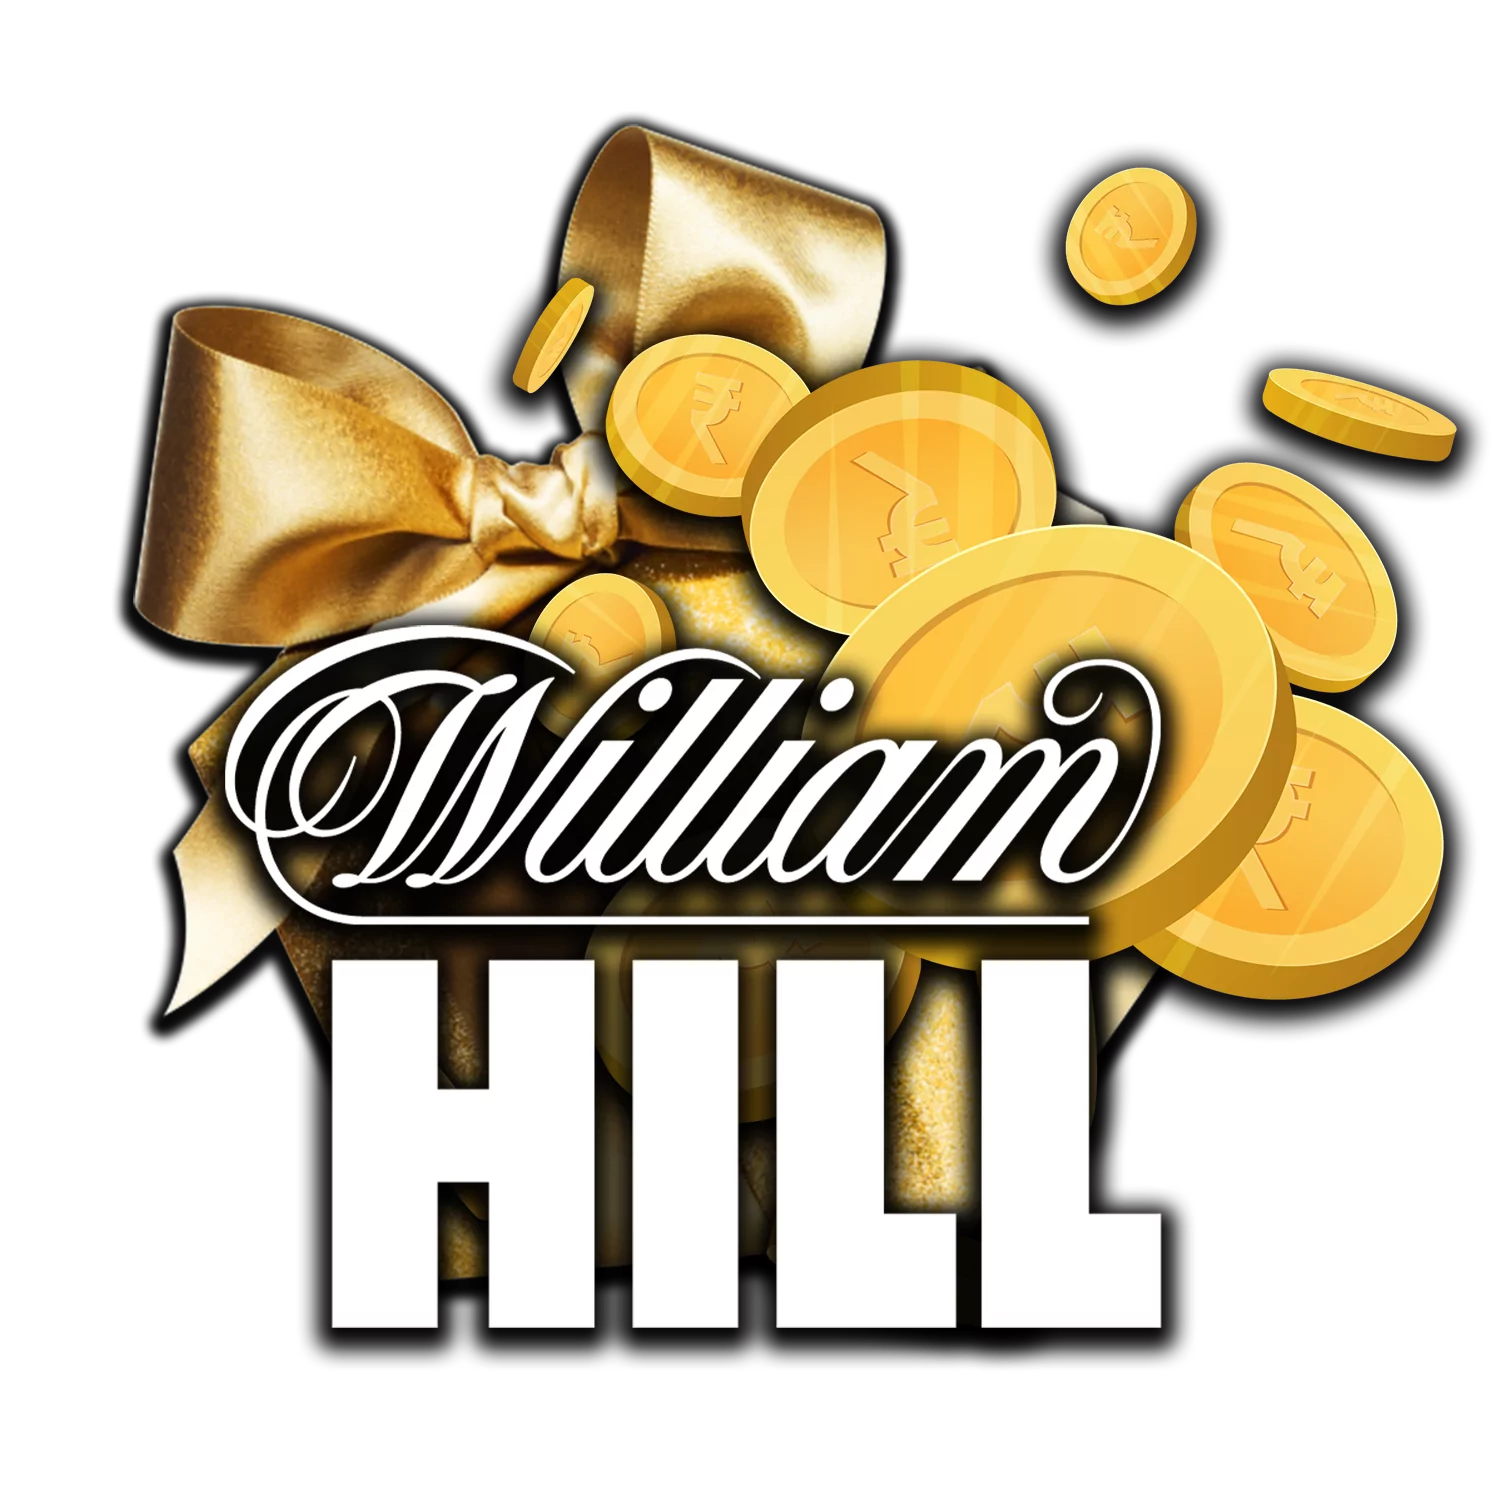 Get 1,000 INR on your first deposit at William Hill.